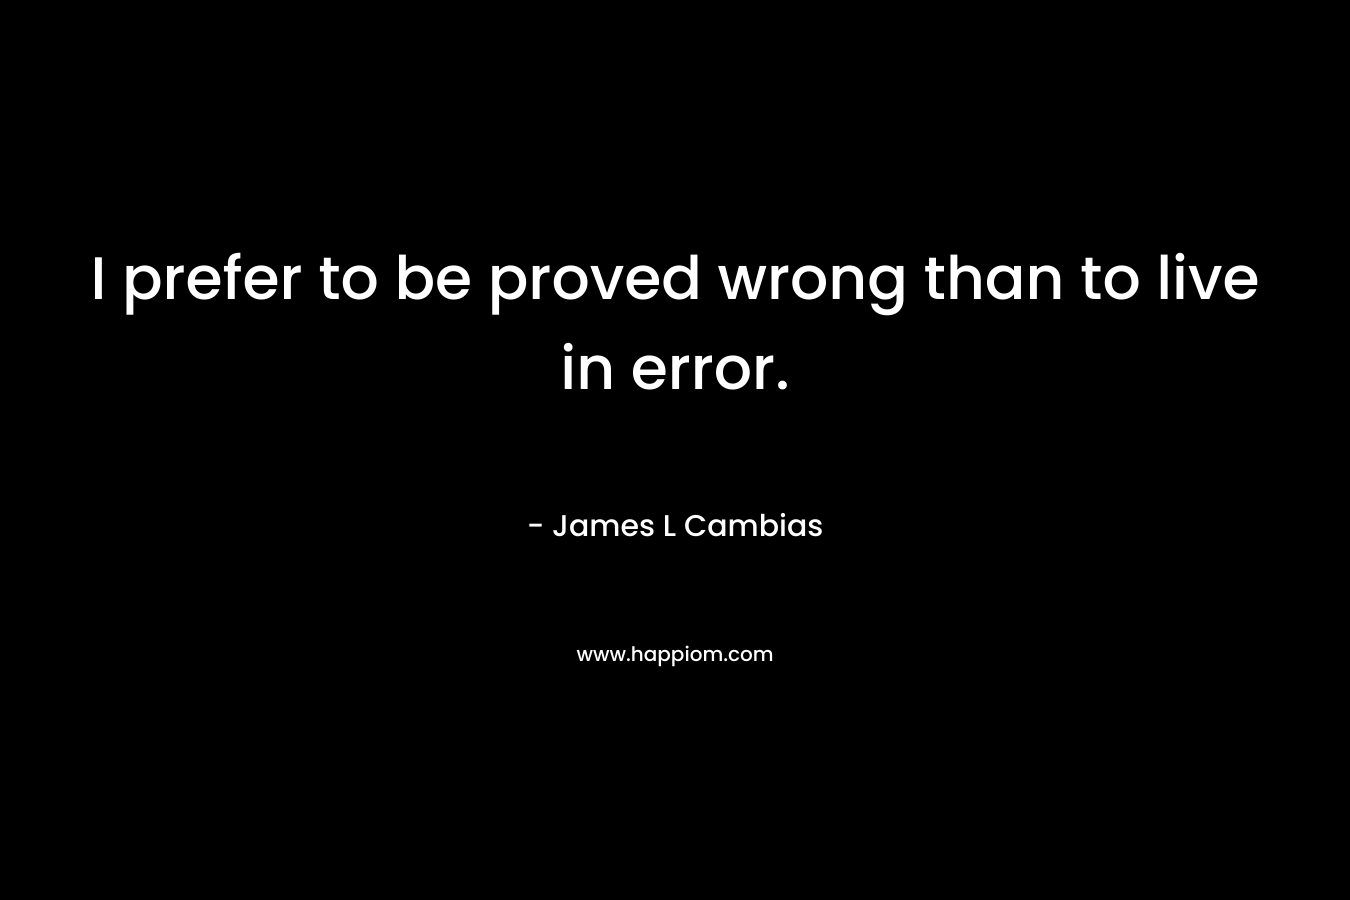 I prefer to be proved wrong than to live in error. – James L Cambias